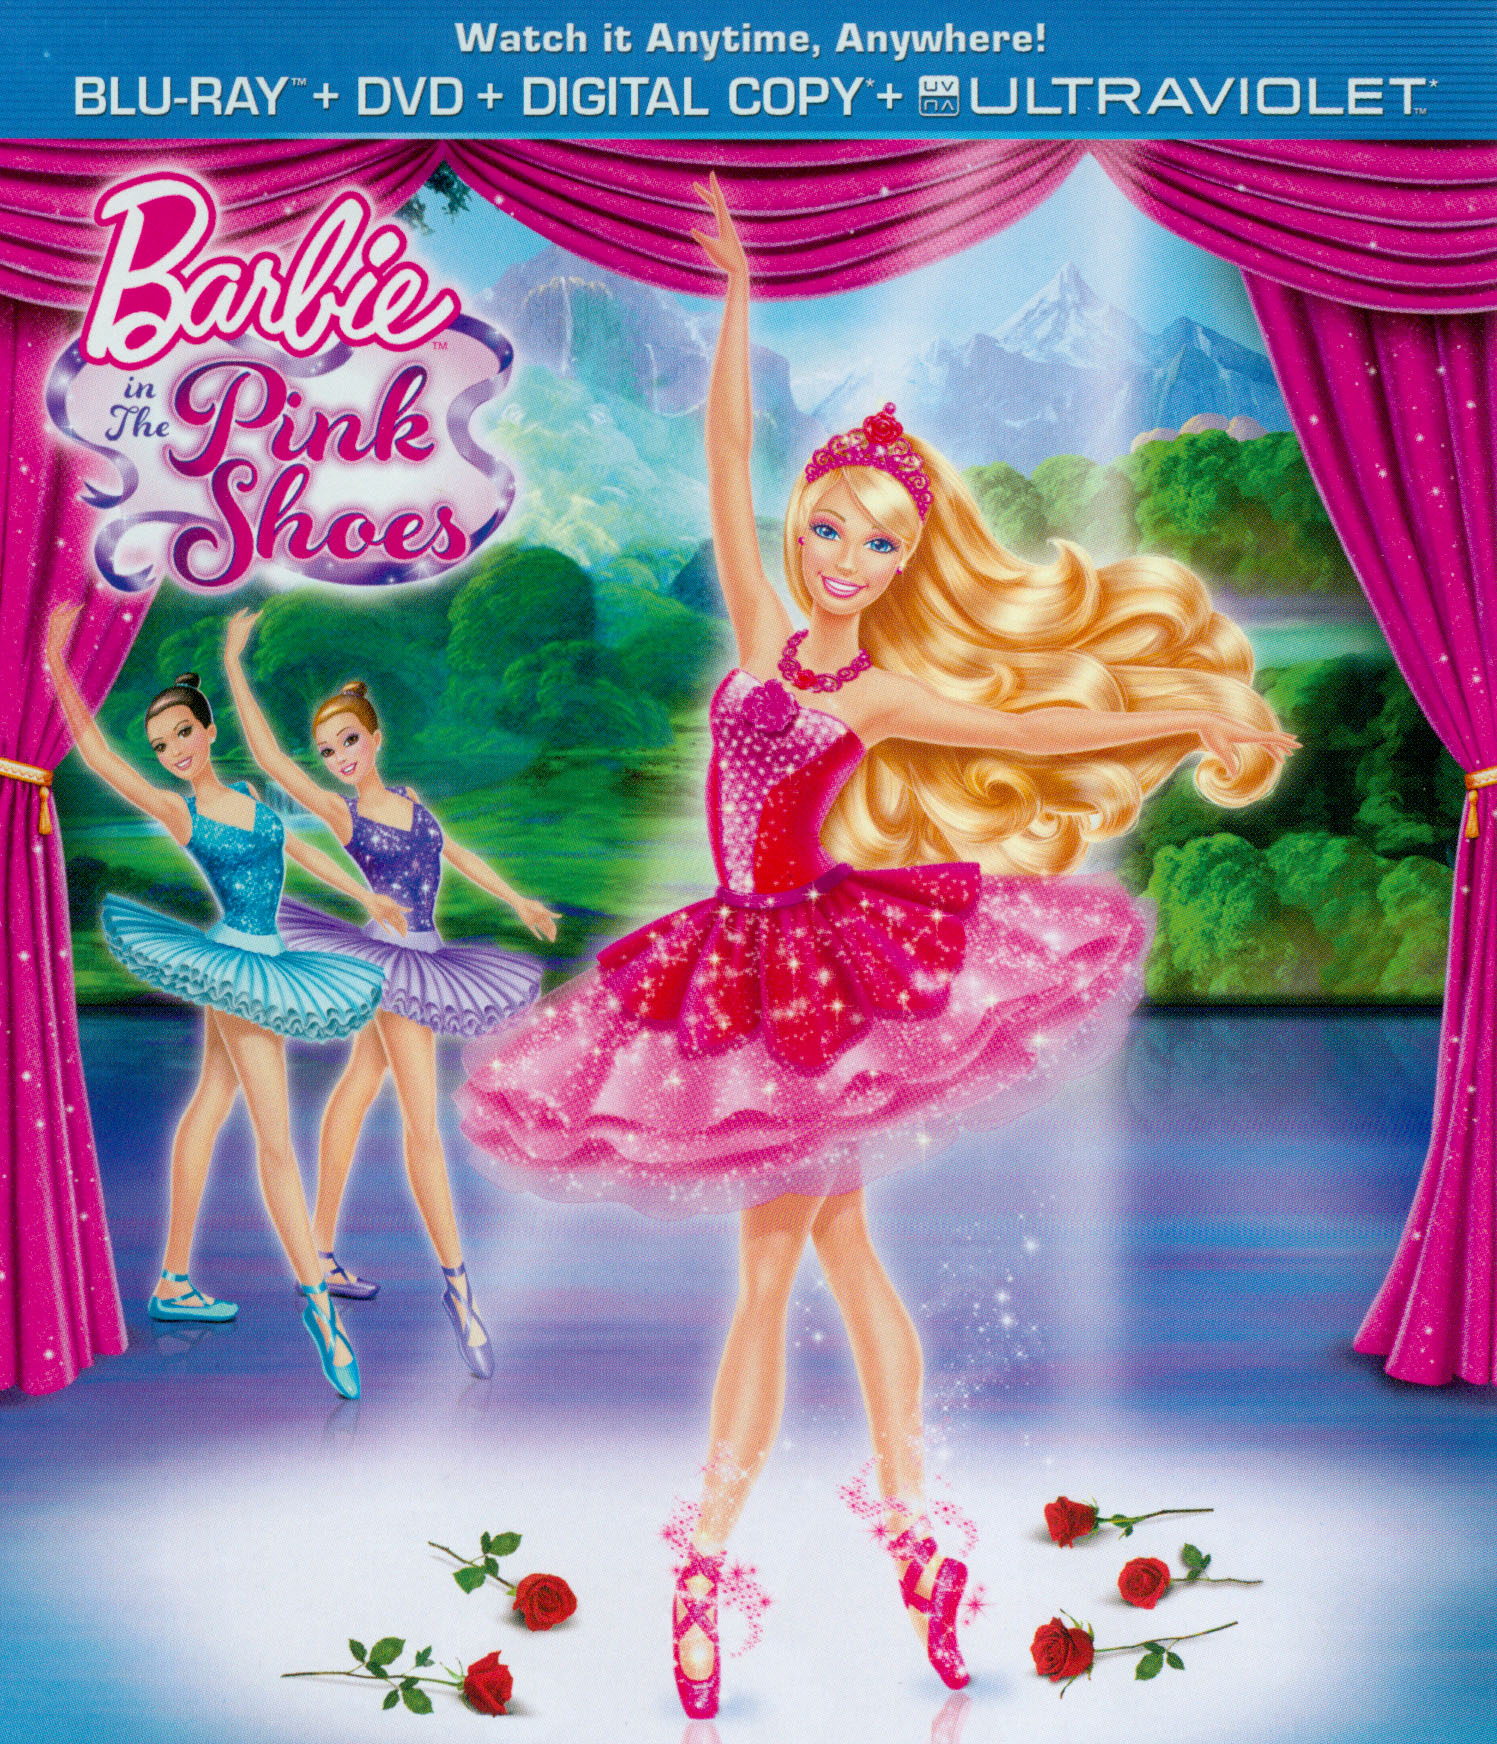 Barbie In The Pink Shoes 2013 Full Movie Online In Hd Quality